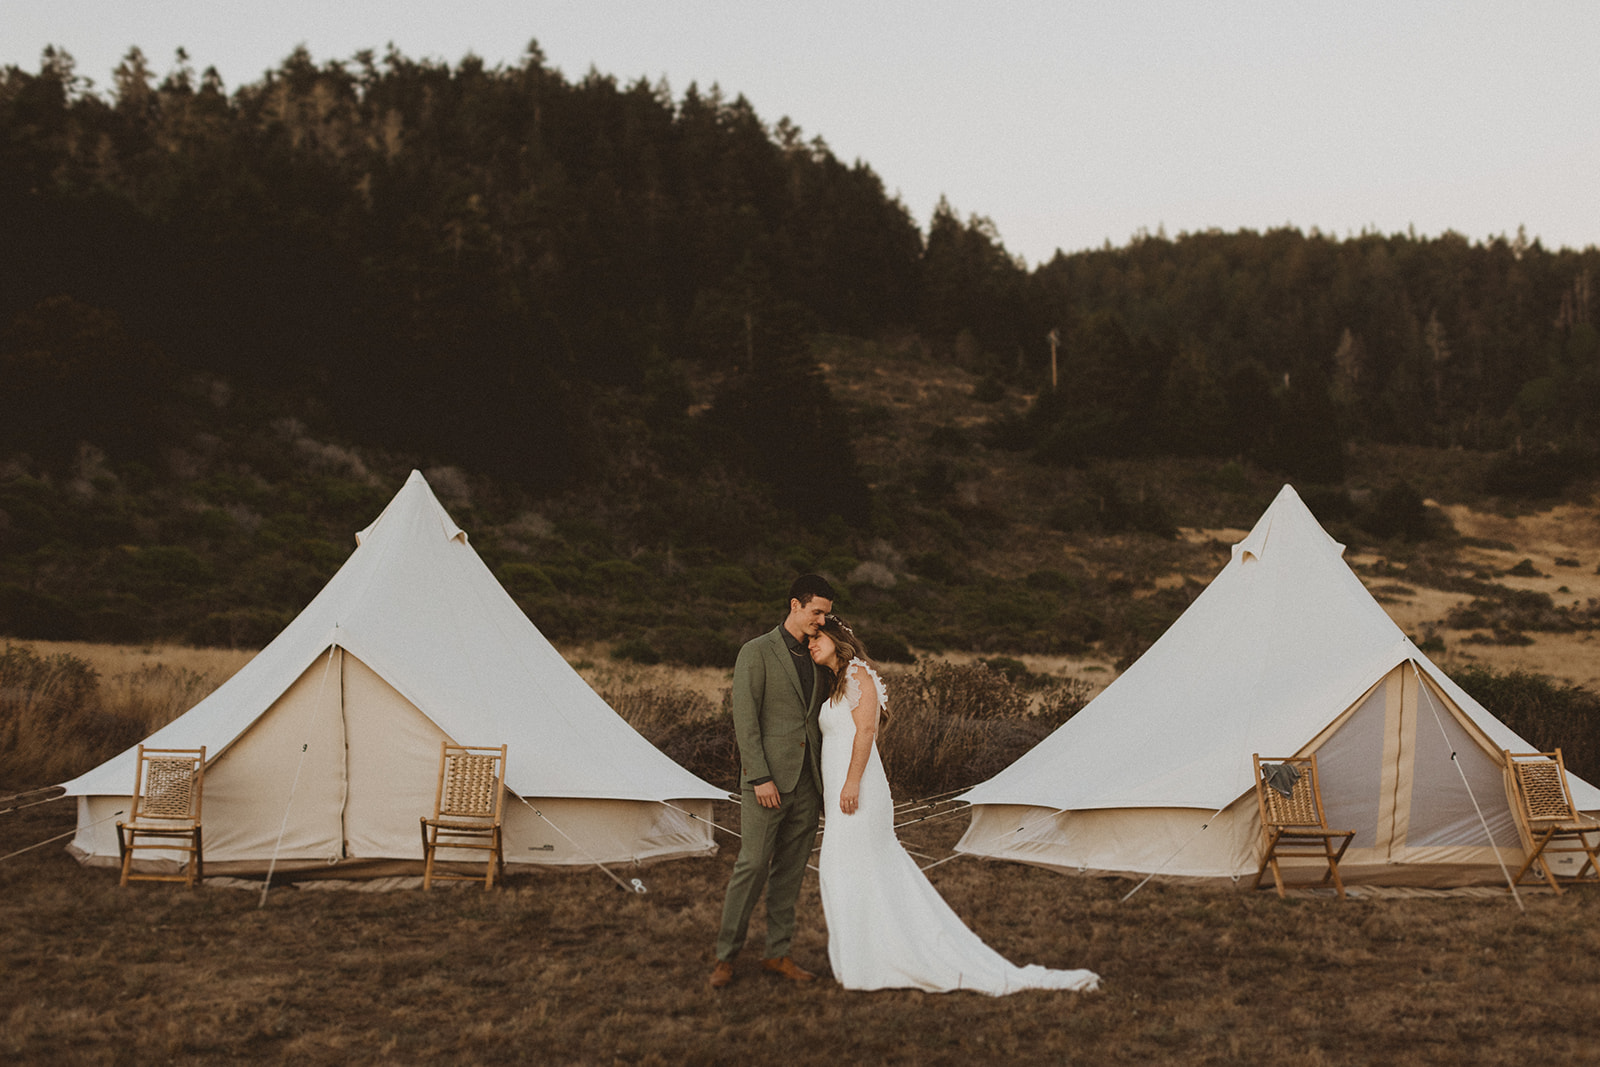 Glamping tents at Cuffey's cove